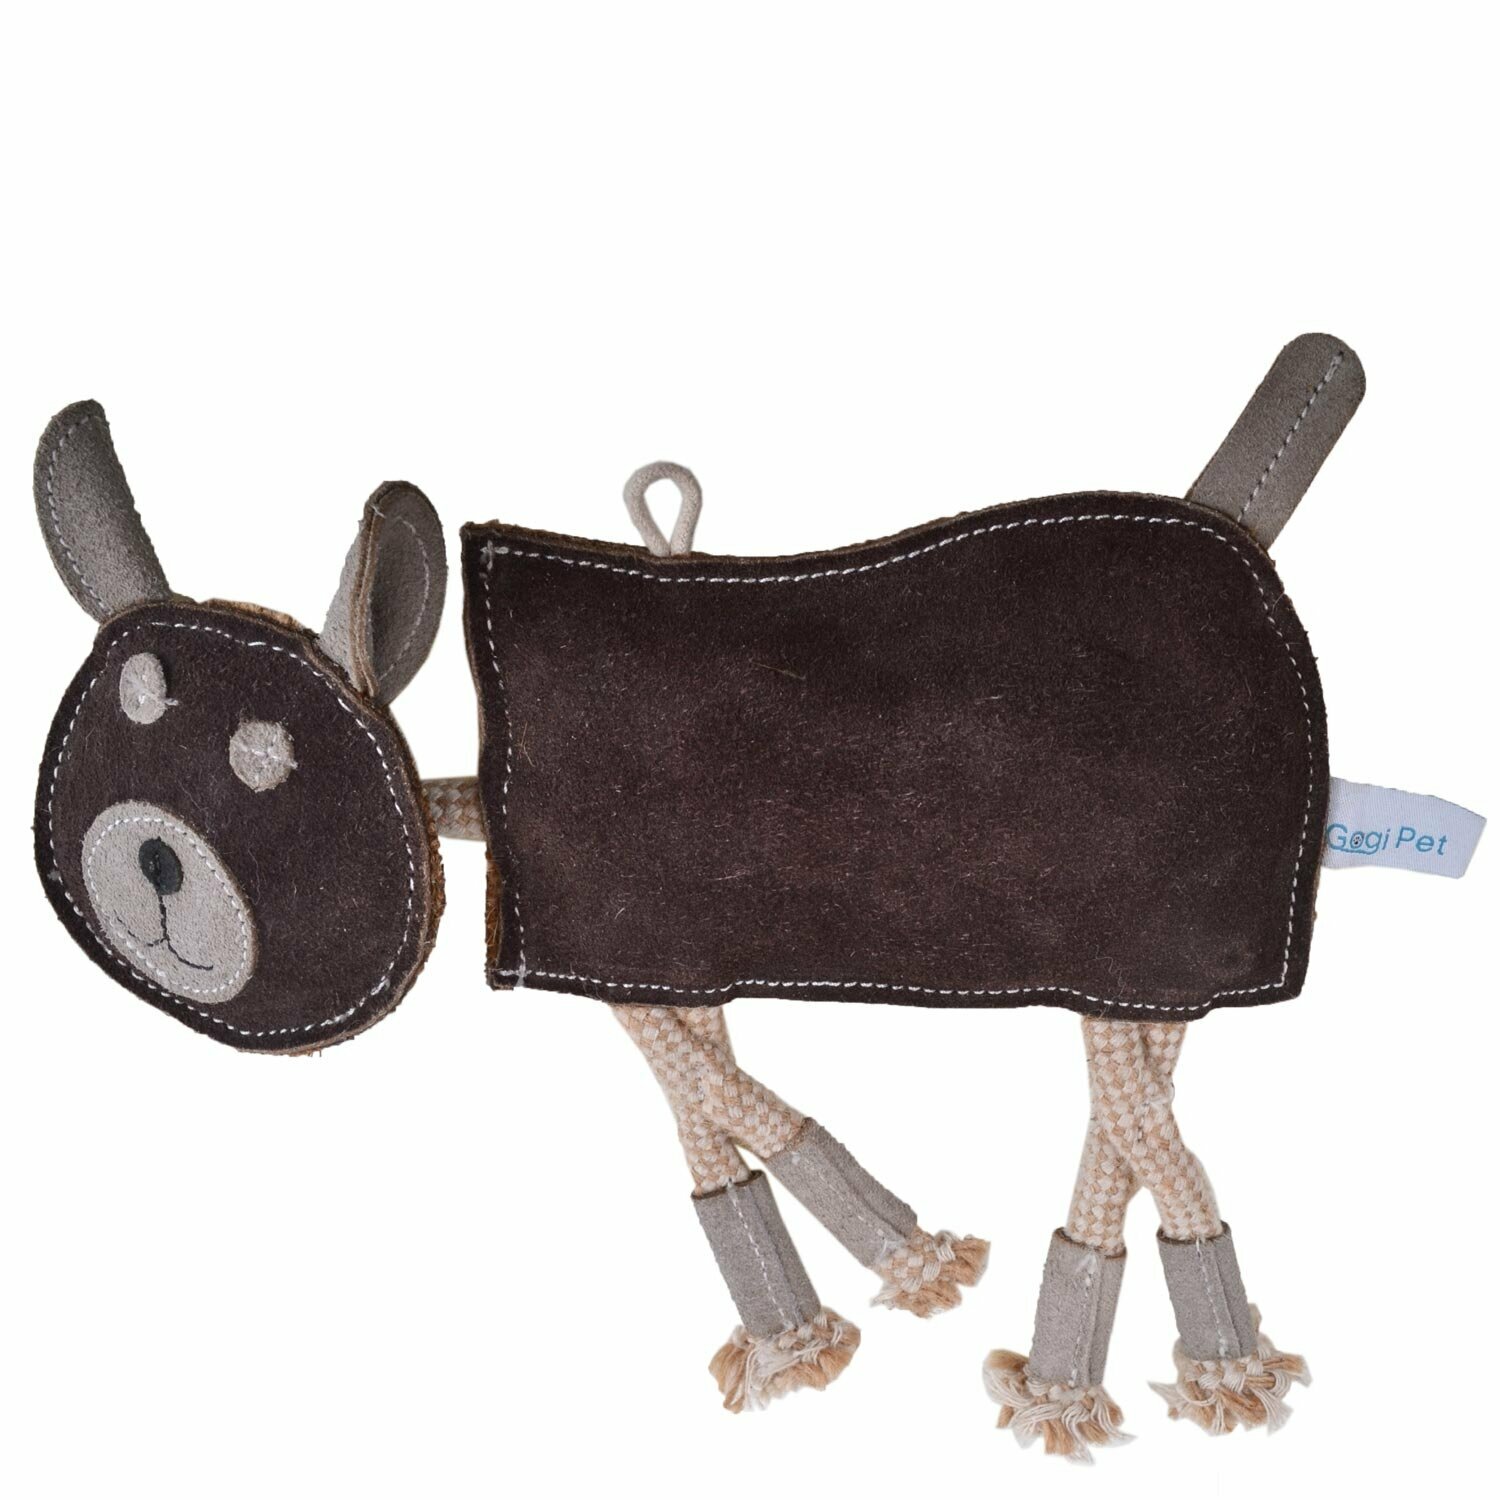 GogiPet ® dog toy - Brown cow made of genuine leather